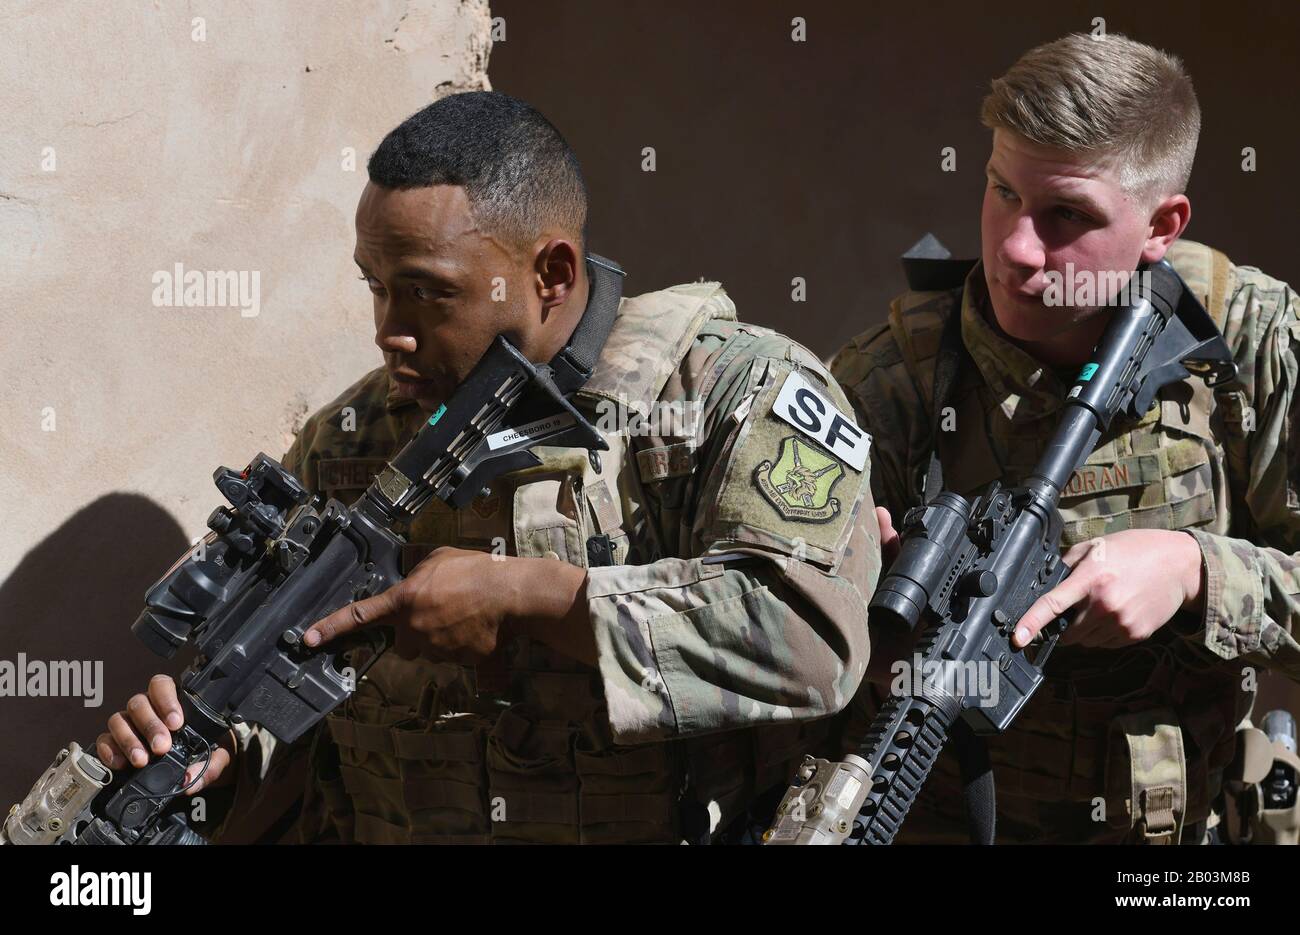 U.S. Air Force Staff Sgt. Noel Cheeseboro, left, and Airman 1st Class Ian Moran, 409th Expeditionary Security Forces Squadron Response Force team members, conduct building clearing procedures during a close quarters battle refresher course at Nigerian Air Base 201 February 5, 2020 in Agadez, Niger. Stock Photo